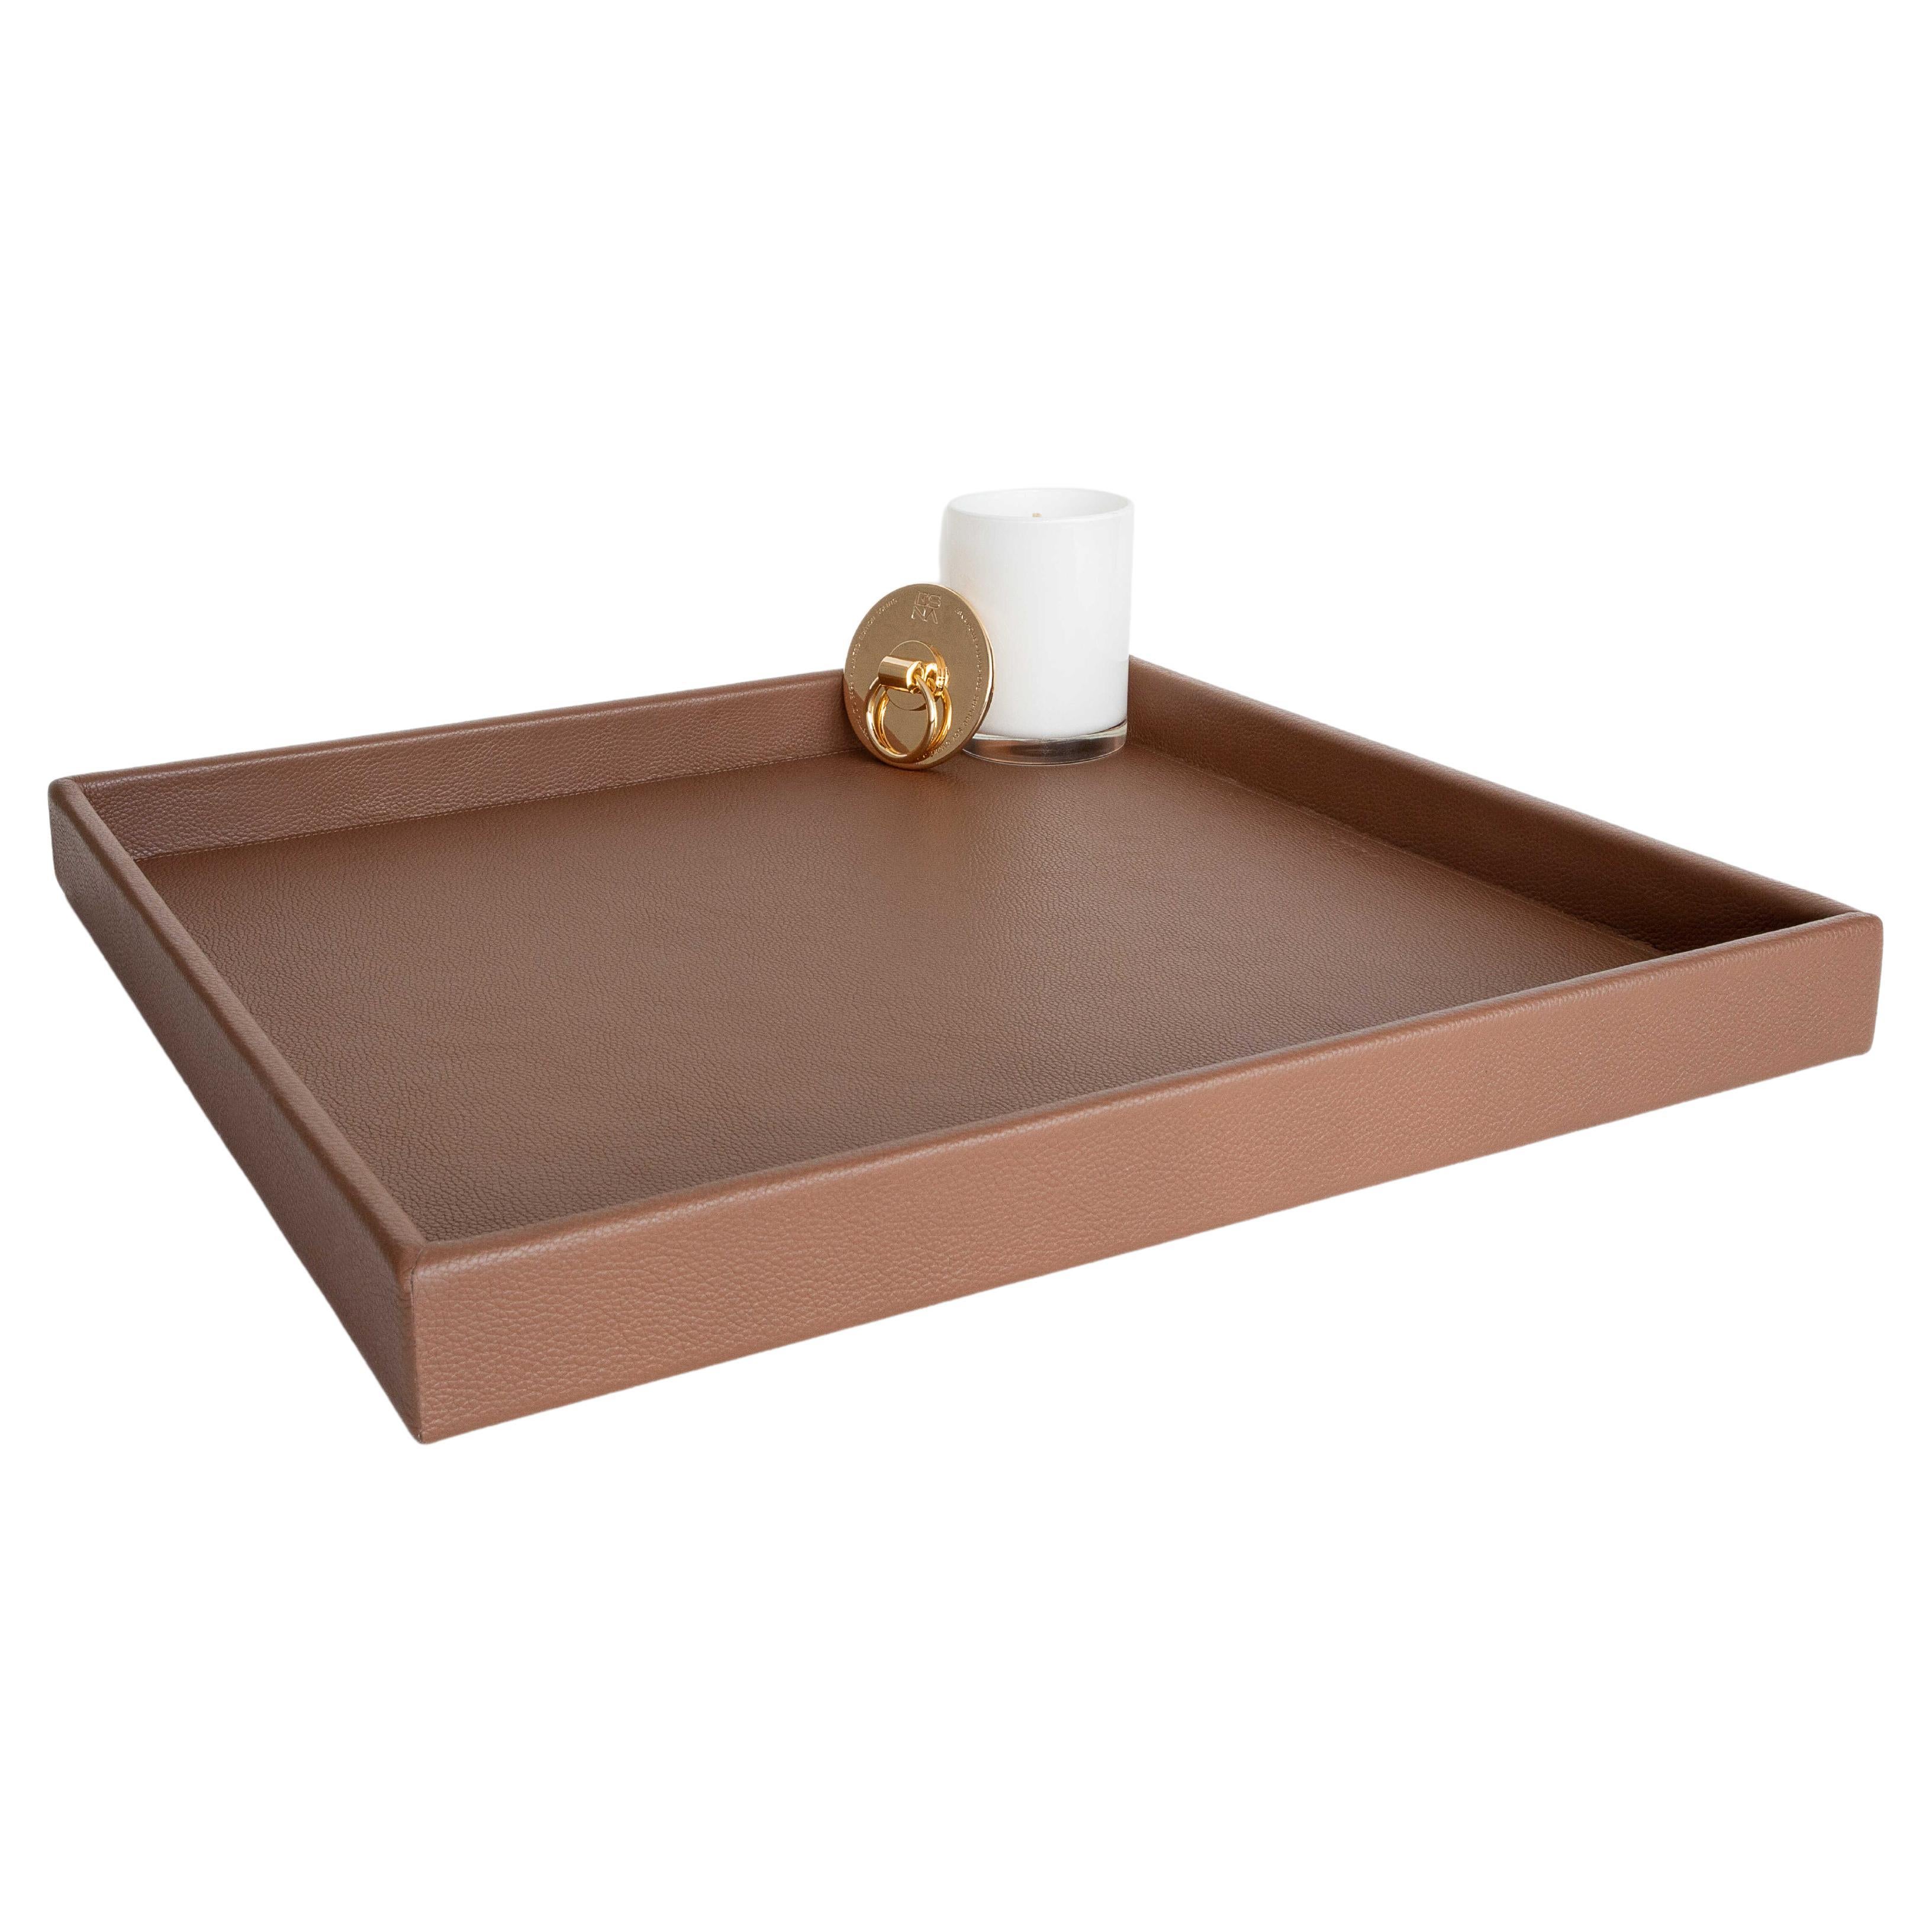 Leather Tray, Large B Square Tray, Handmade - Color: Caramel